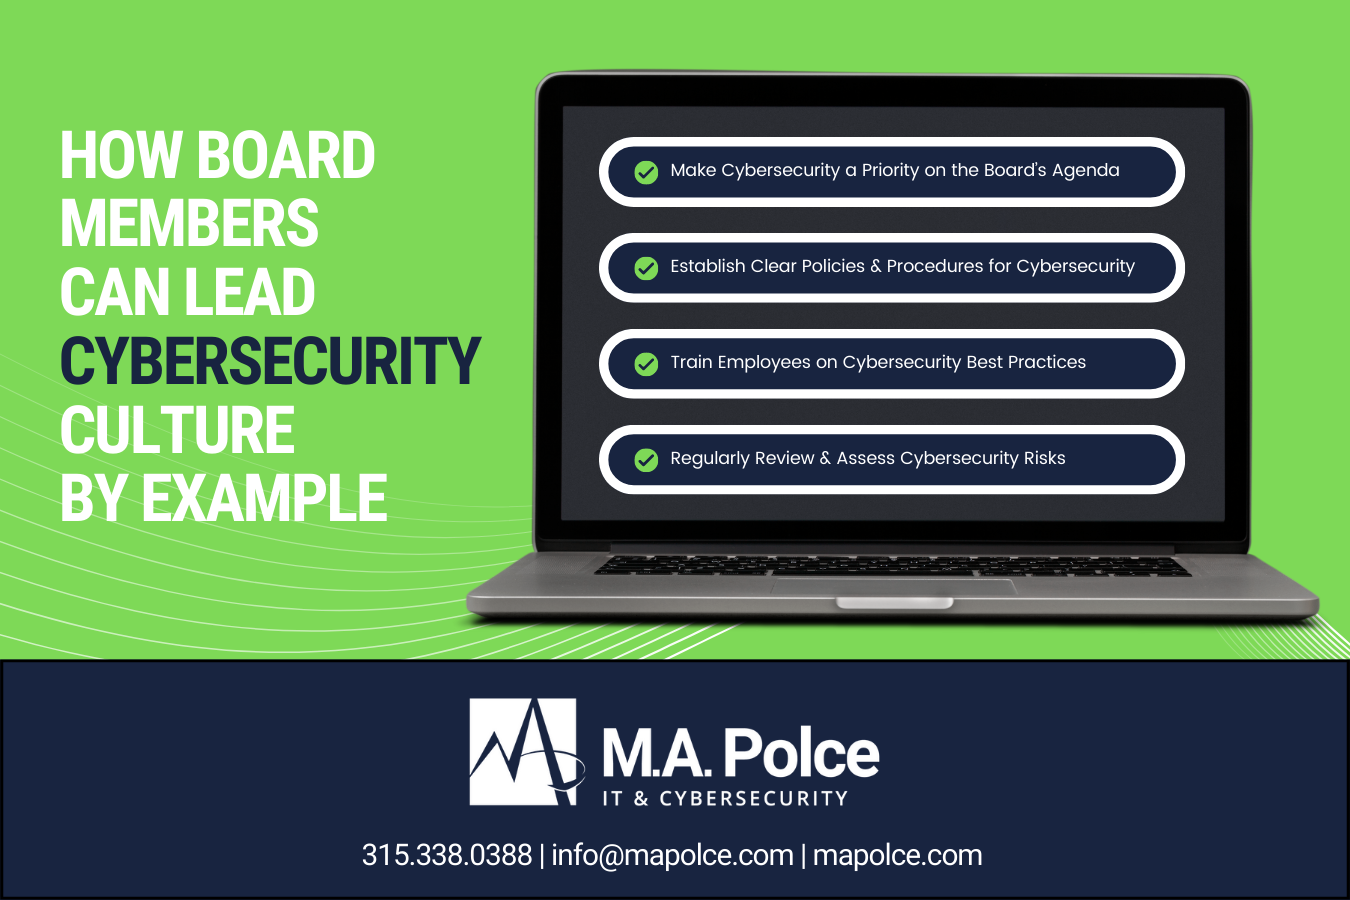 An open laptop displaying four things that leadership or board members at a business can do to raise a cybersecurity culture at their organization. To the left of the laptop graphic is text that says "How board members can lead cybersecurity culture by example." In a dark blue rectangle panel beneath the laptop and text is M.A. Polce's logo and contact information including the phone number 315.338.0388, the email info@mapolce.com, and the company's web domain, mapolce.com.